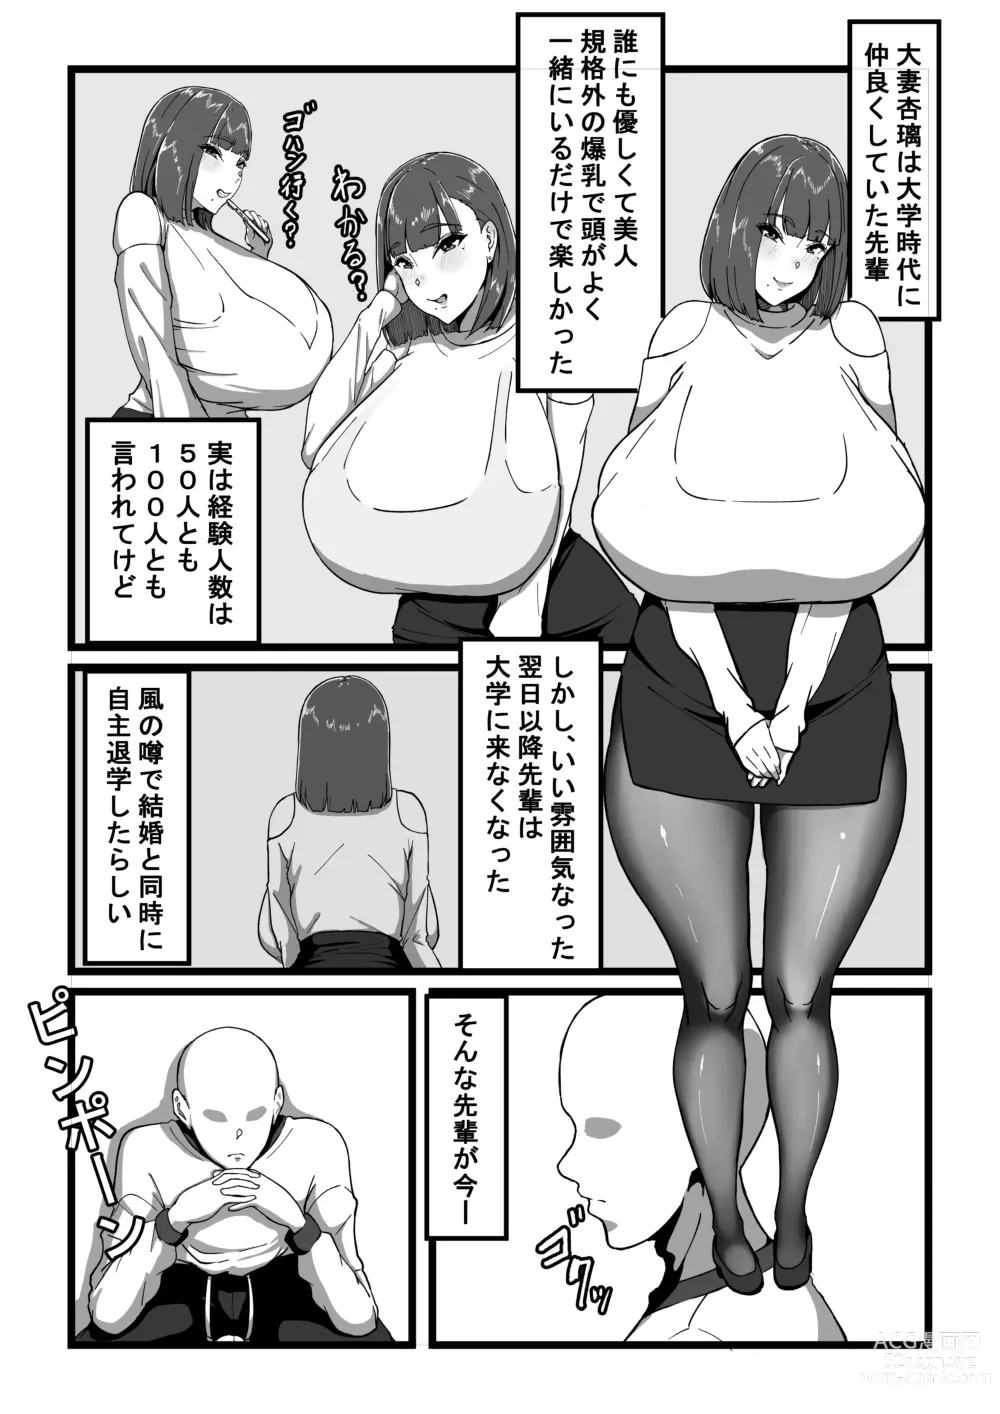 Page 6 of doujinshi Delivery Love Doll